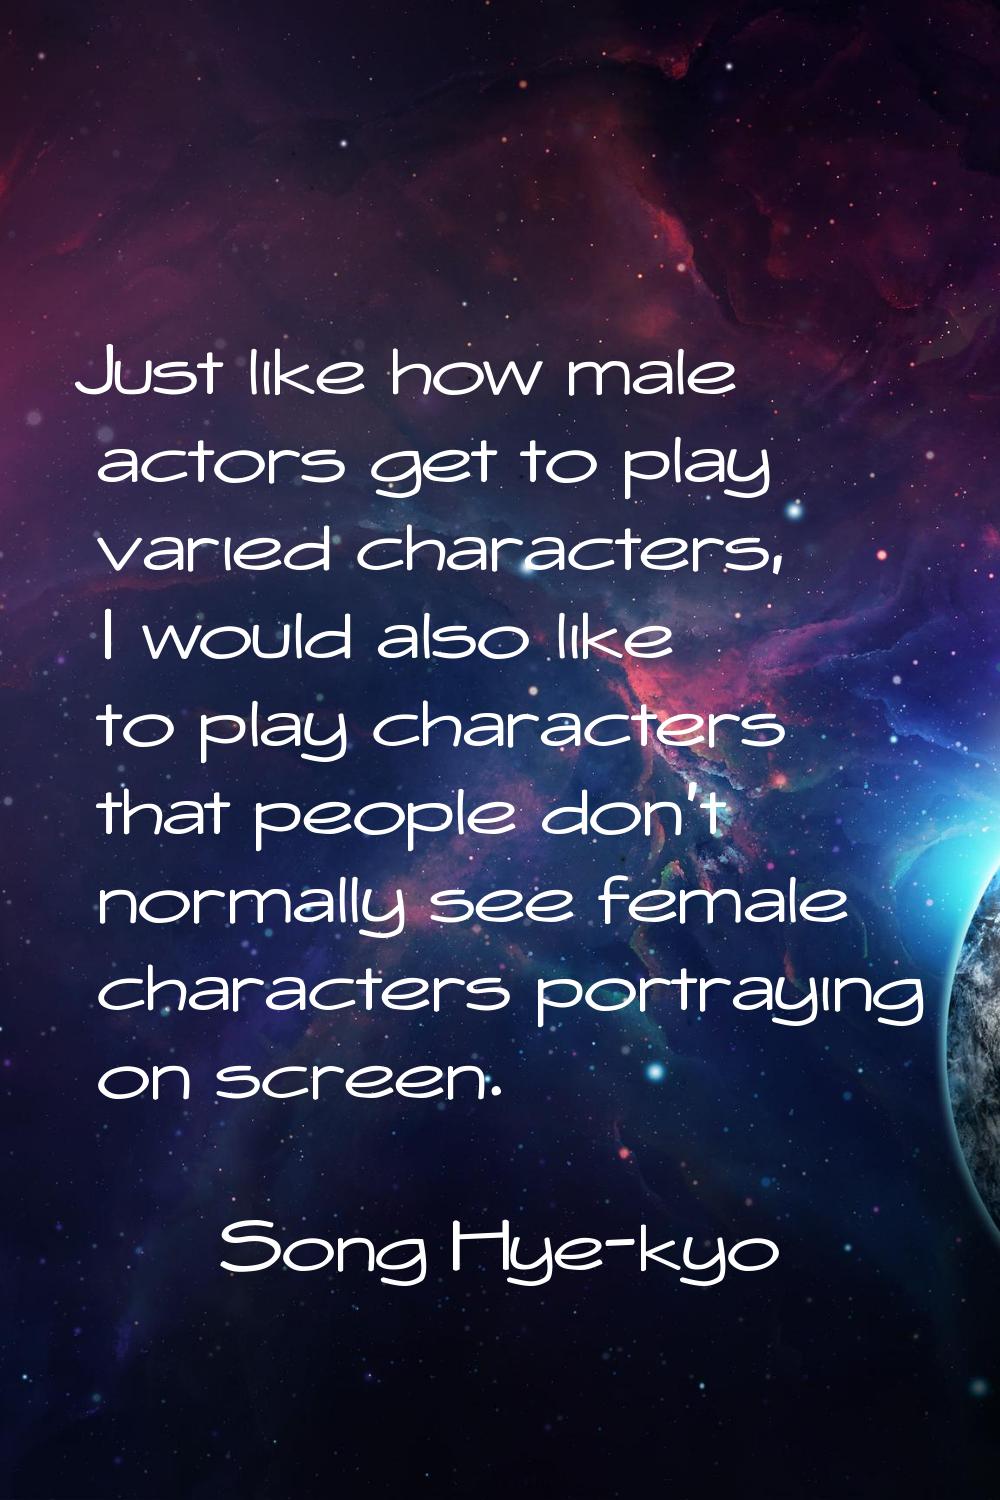 Just like how male actors get to play varied characters, I would also like to play characters that 